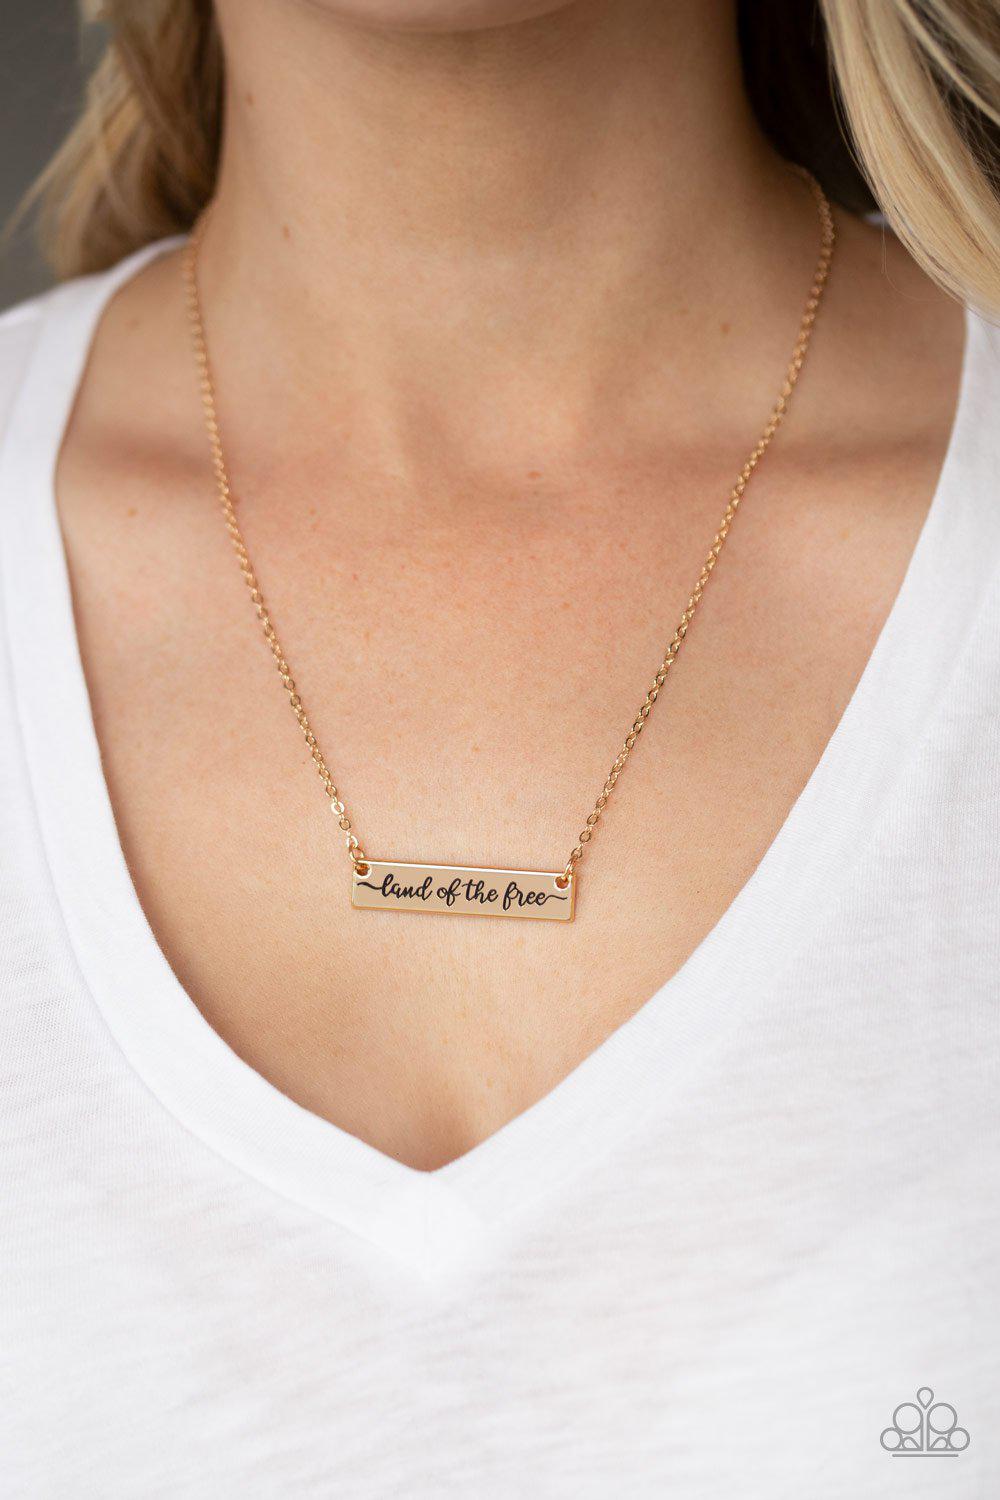 Land Of The Free Gold Inspirational Necklace - Paparazzi Accessories-CarasShop.com - $5 Jewelry by Cara Jewels